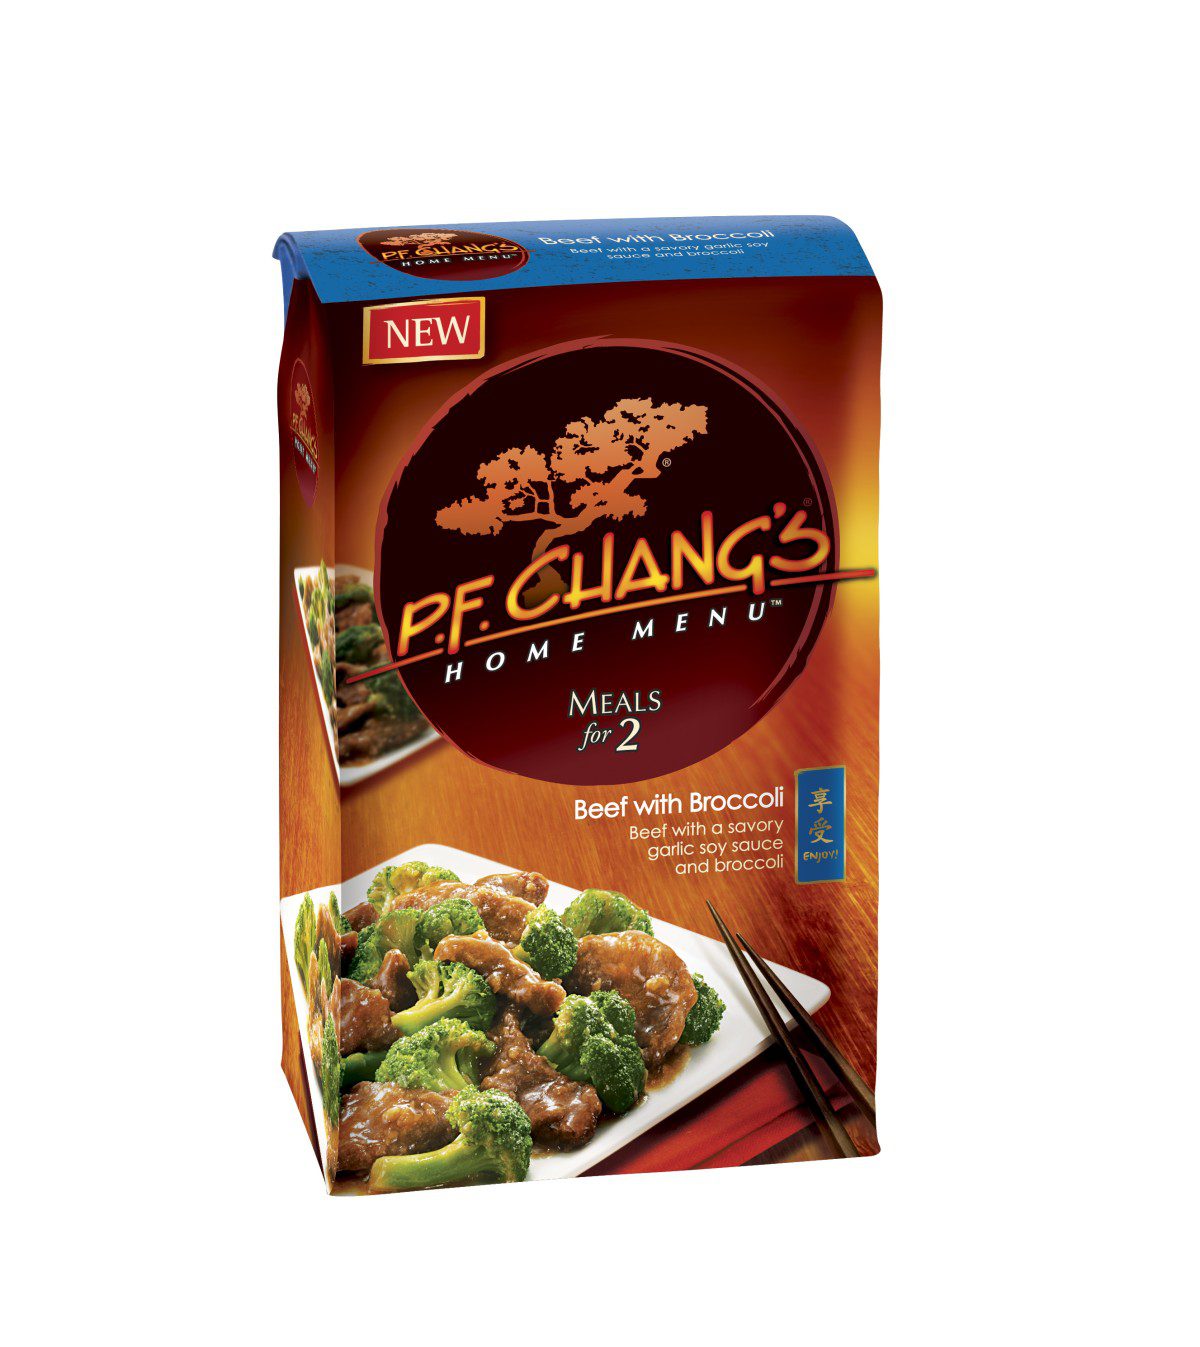 P.F. Changs Home Menu Review & Giveaway (ends 10/22 ...